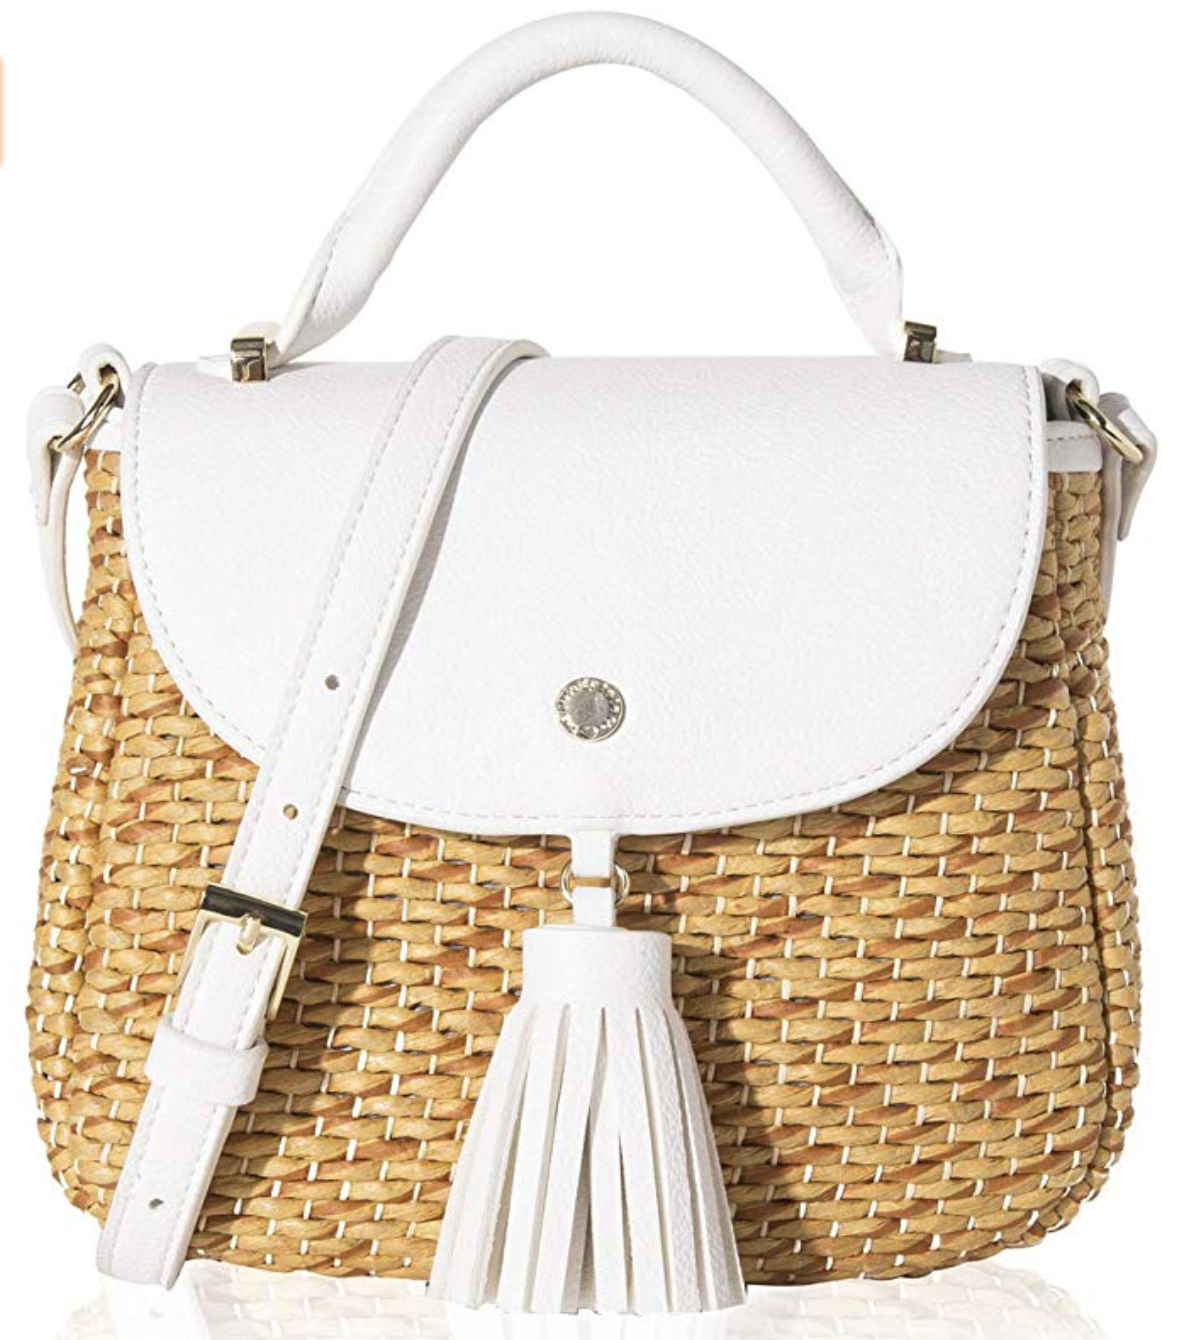 Cute woven bag for spring!